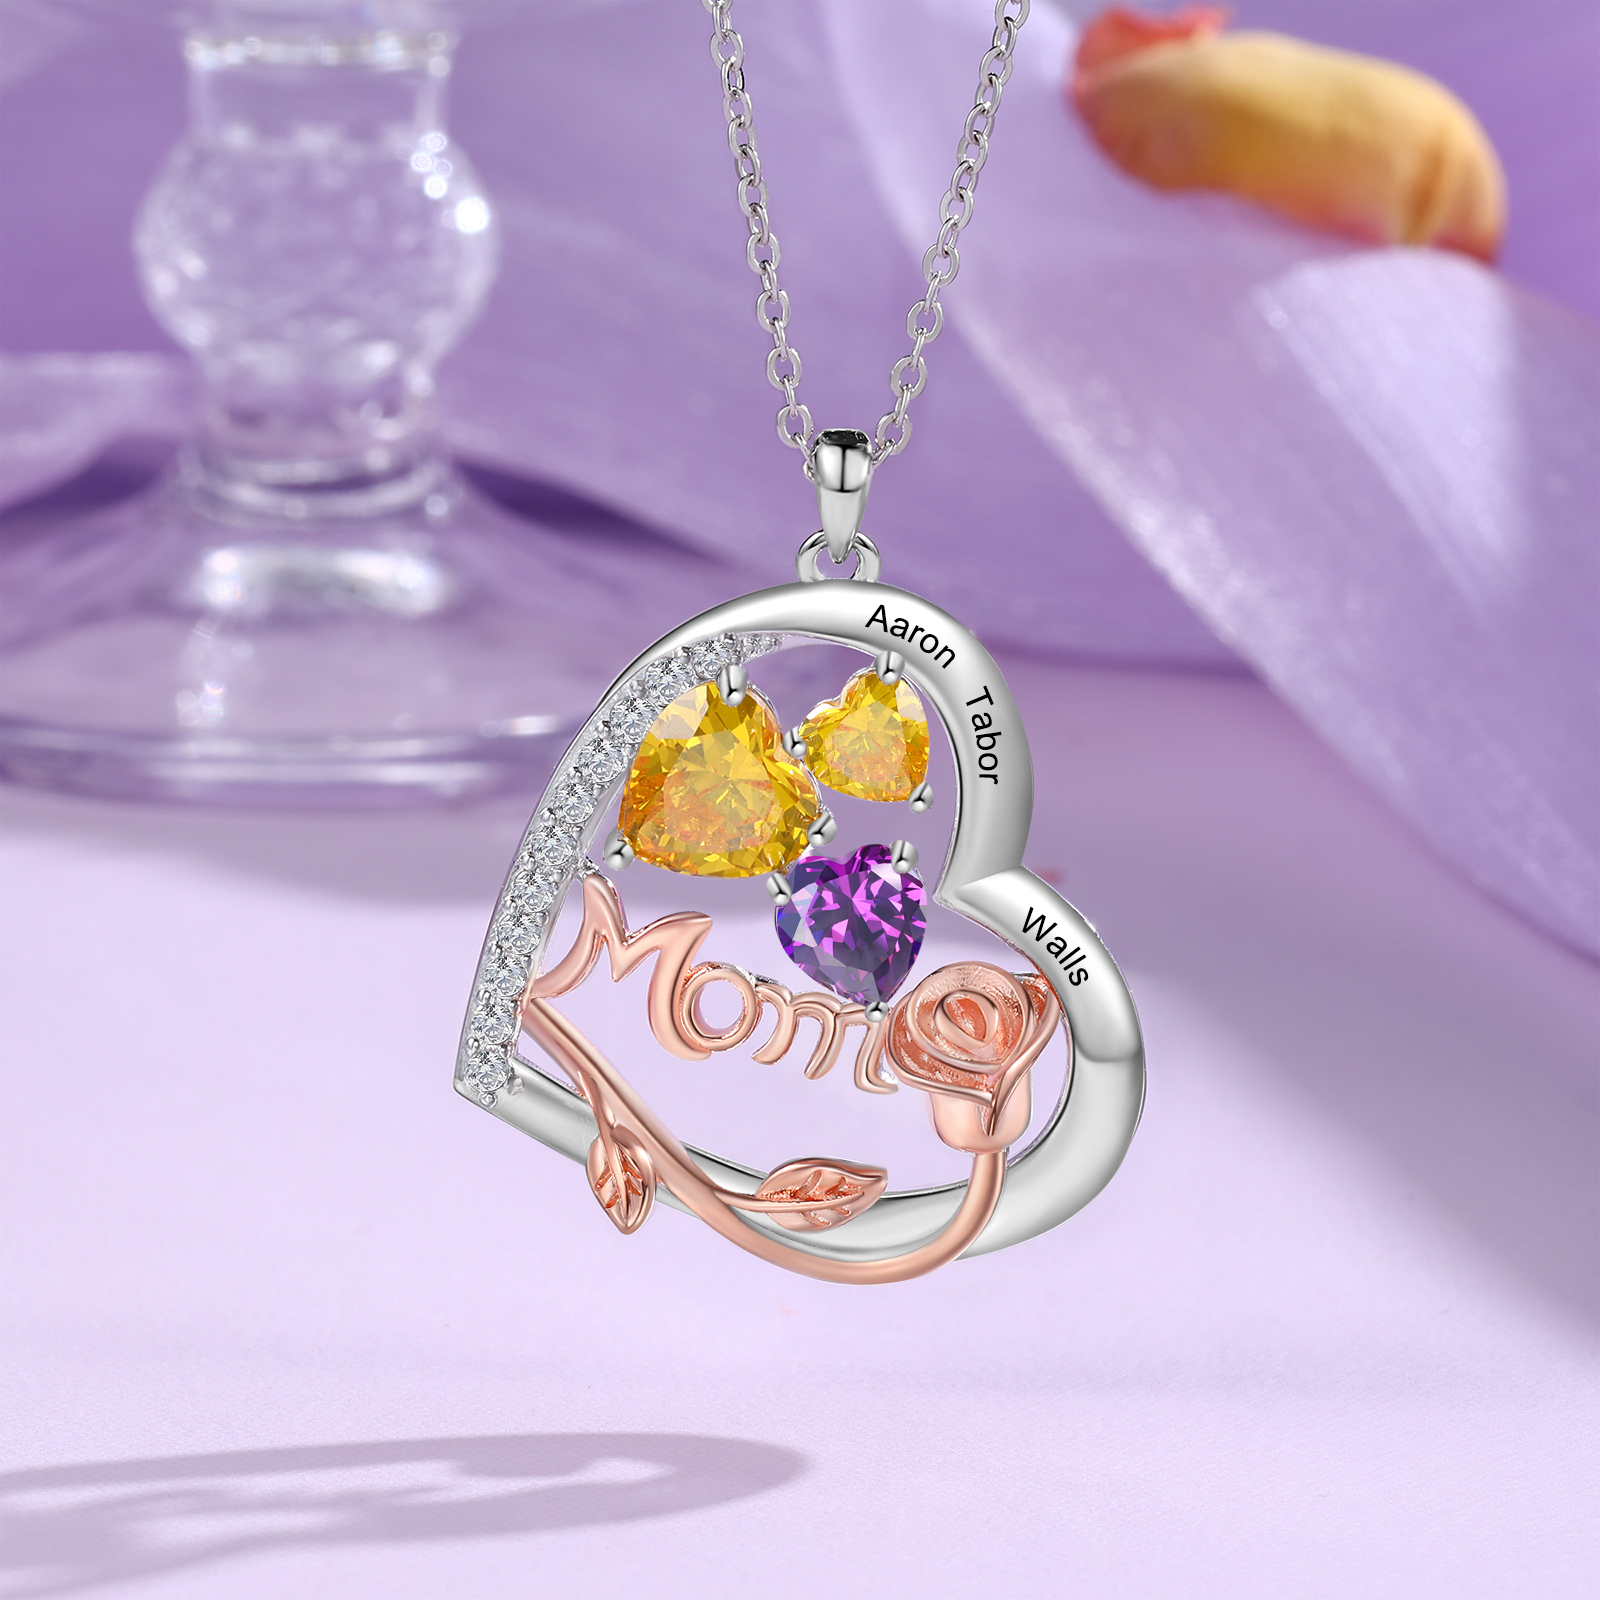 3 Names - Personalized Silver Heart Necklace with Birthstone and Name as a Mother's Day Gift for Mom